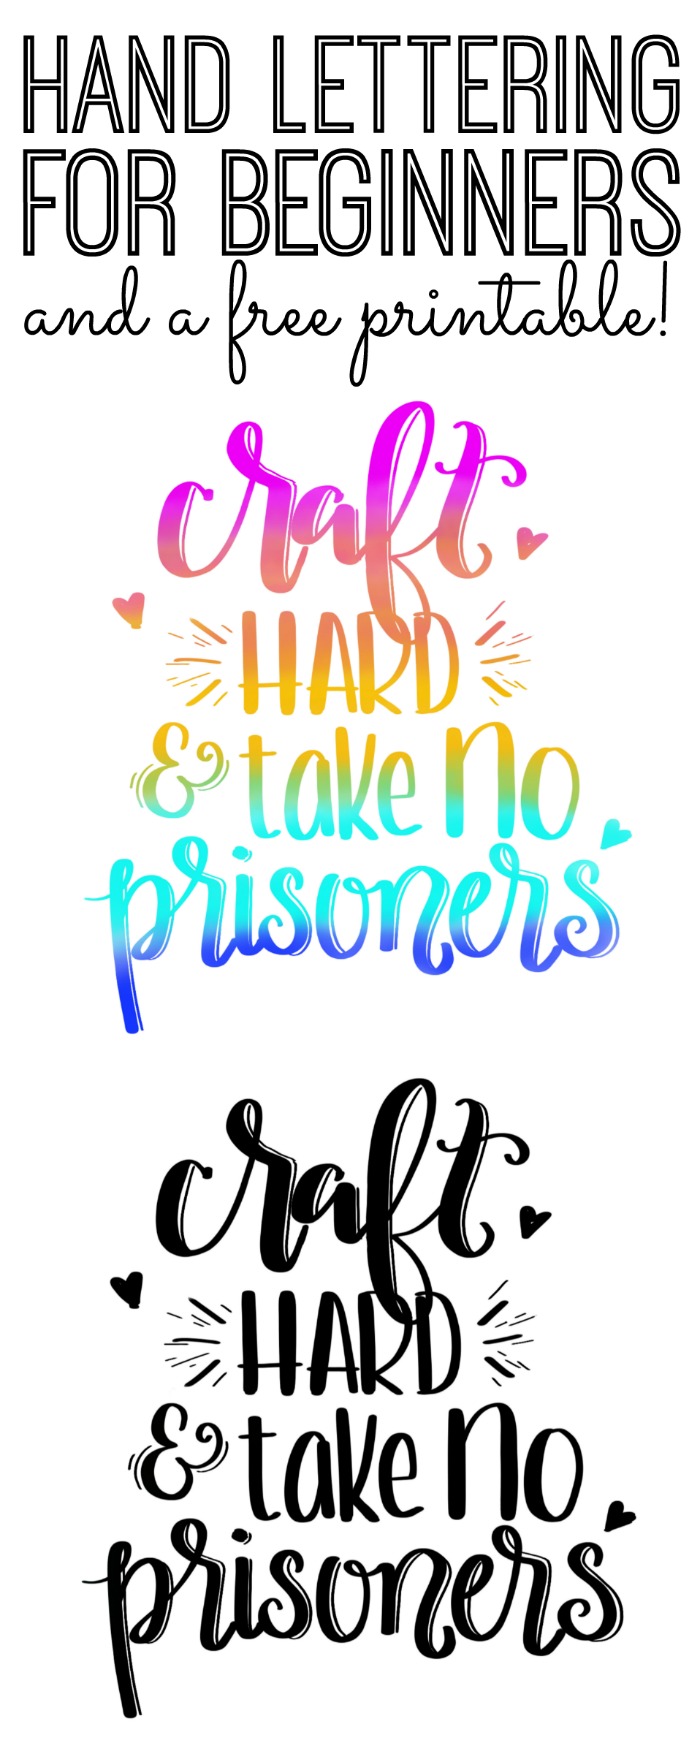 Easy Hand Lettering For Beginners Course - Angie Holden The